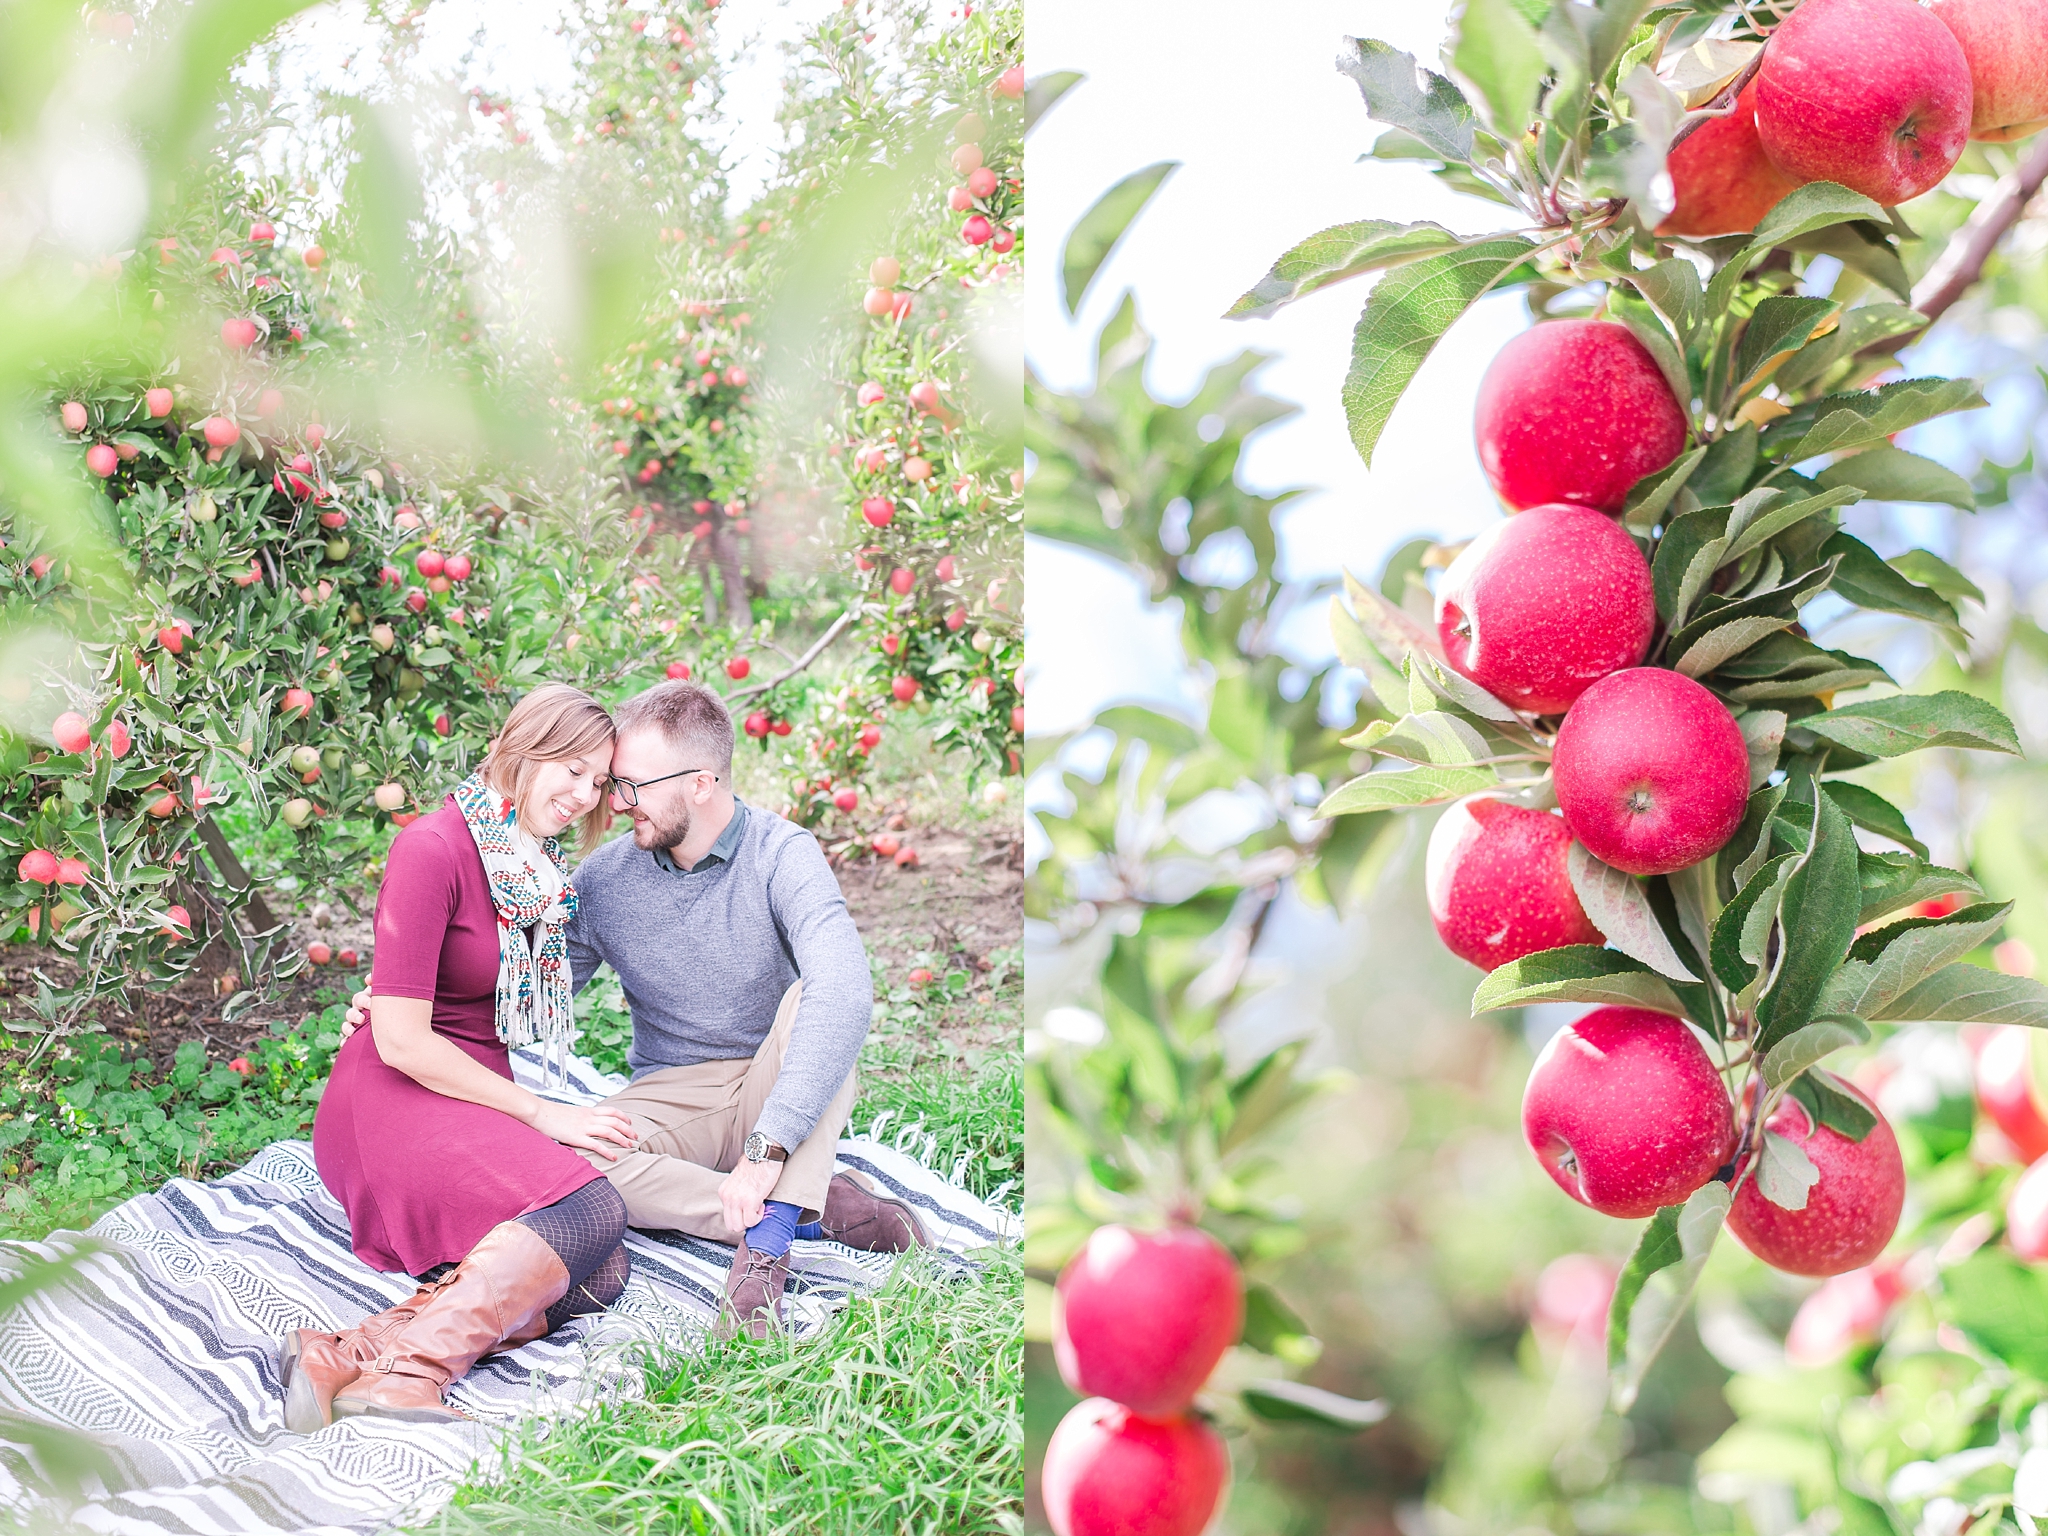 playful-fall-engagement-photos-at-hy's-cider-mill-ochard-in-bruce-township-michigan-by-courtney-carolyn-photography_0004.jpg